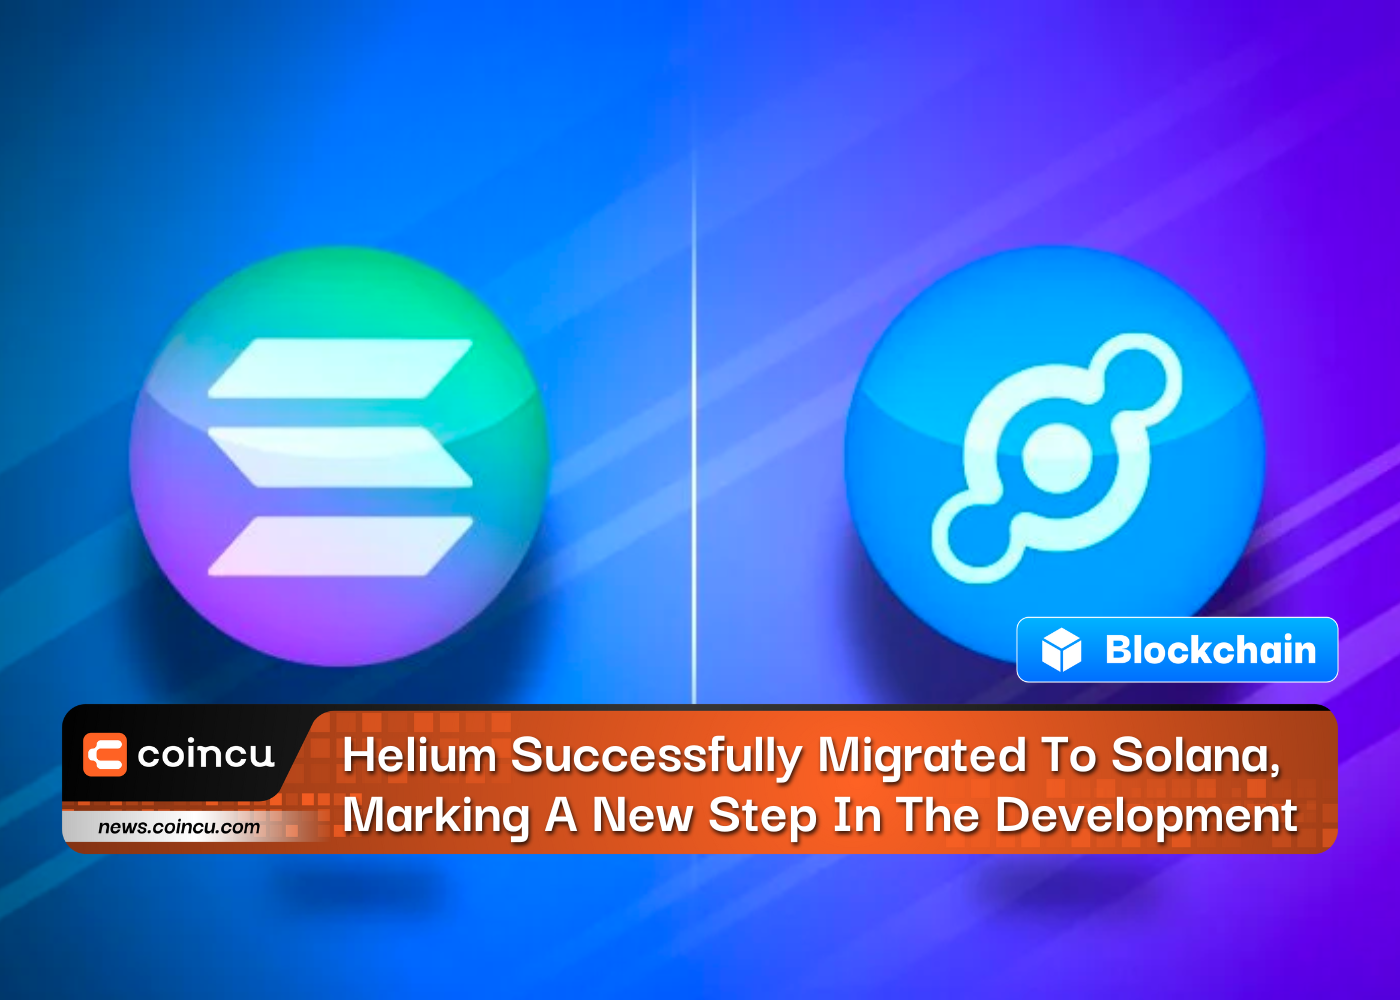 Helium Successfully Migrated To Solana, Marking A New Step In The Development